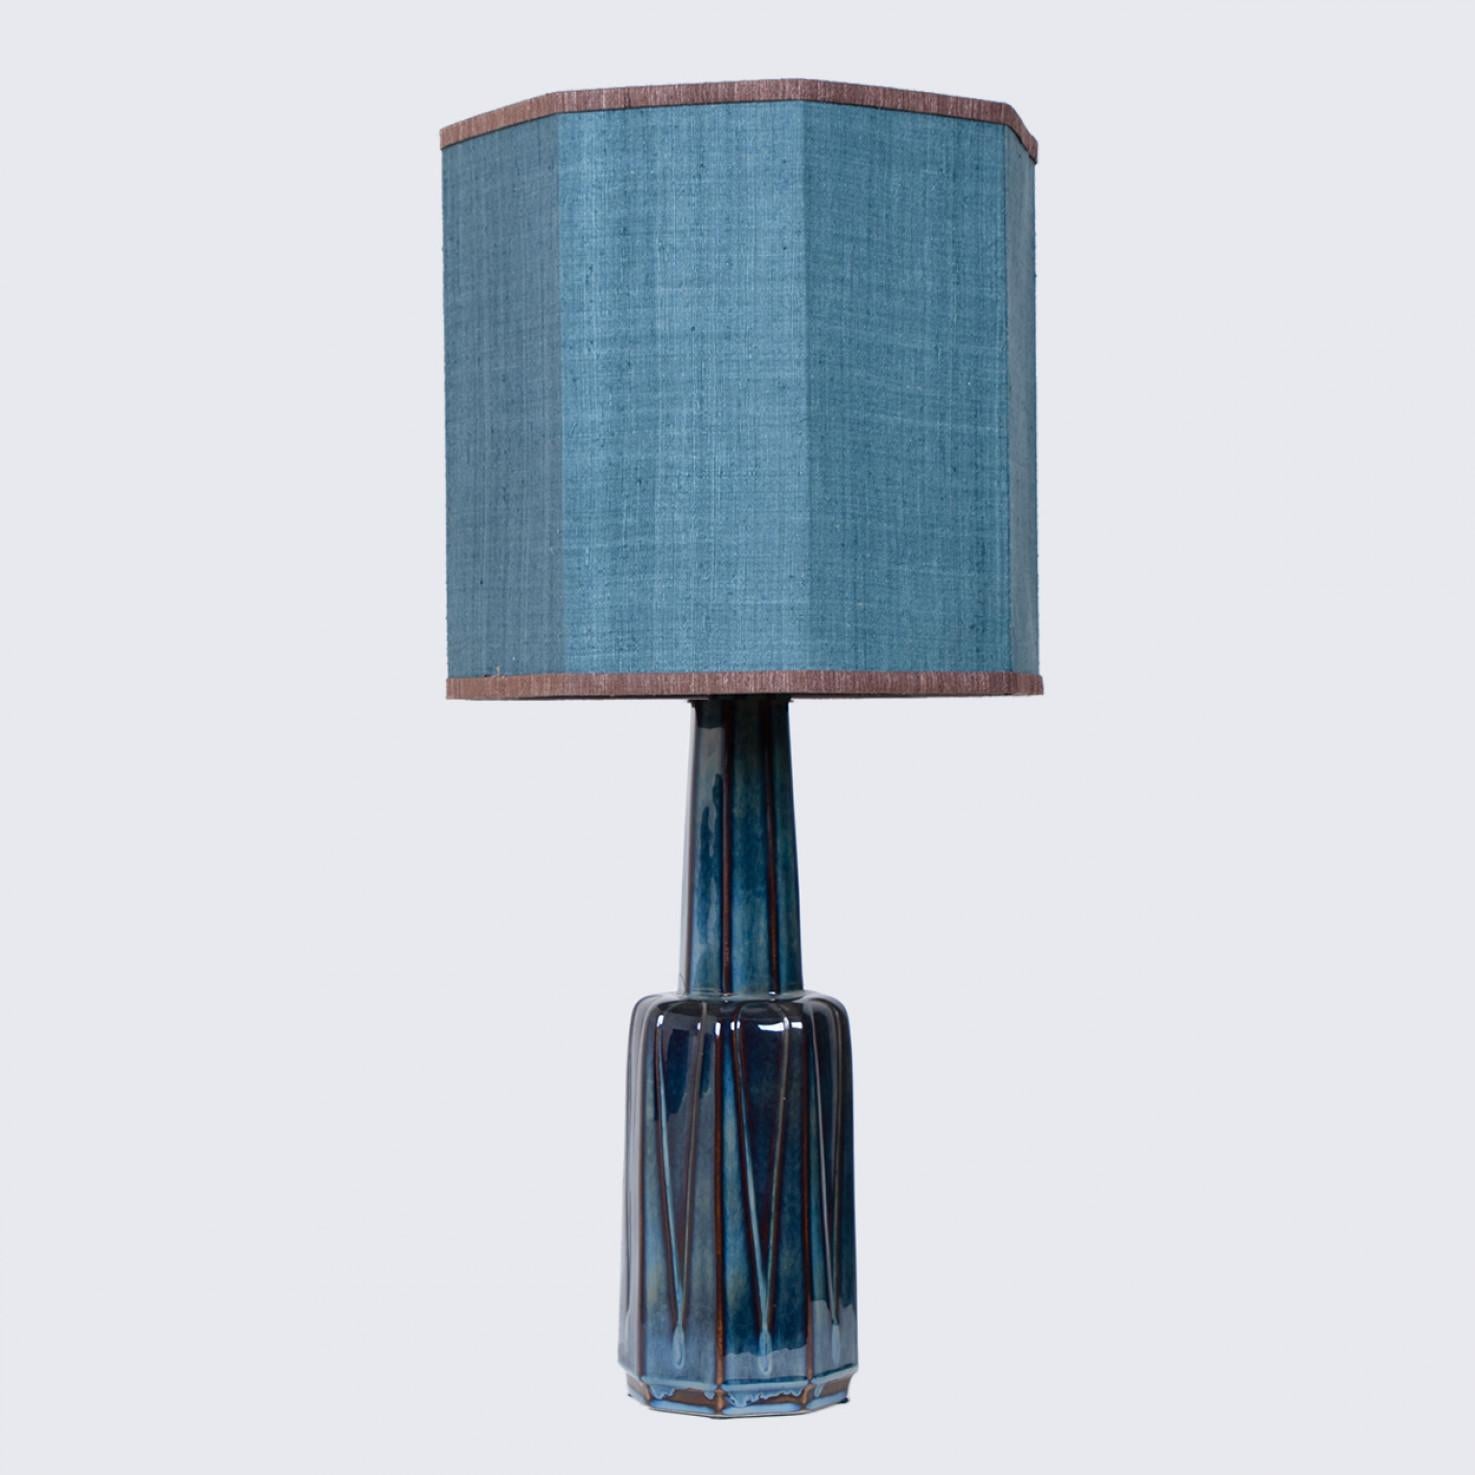 Danish 1 of the 2 Large Soholm Lamp with New Blue Silk Custom Made Lampshade Houben, 19